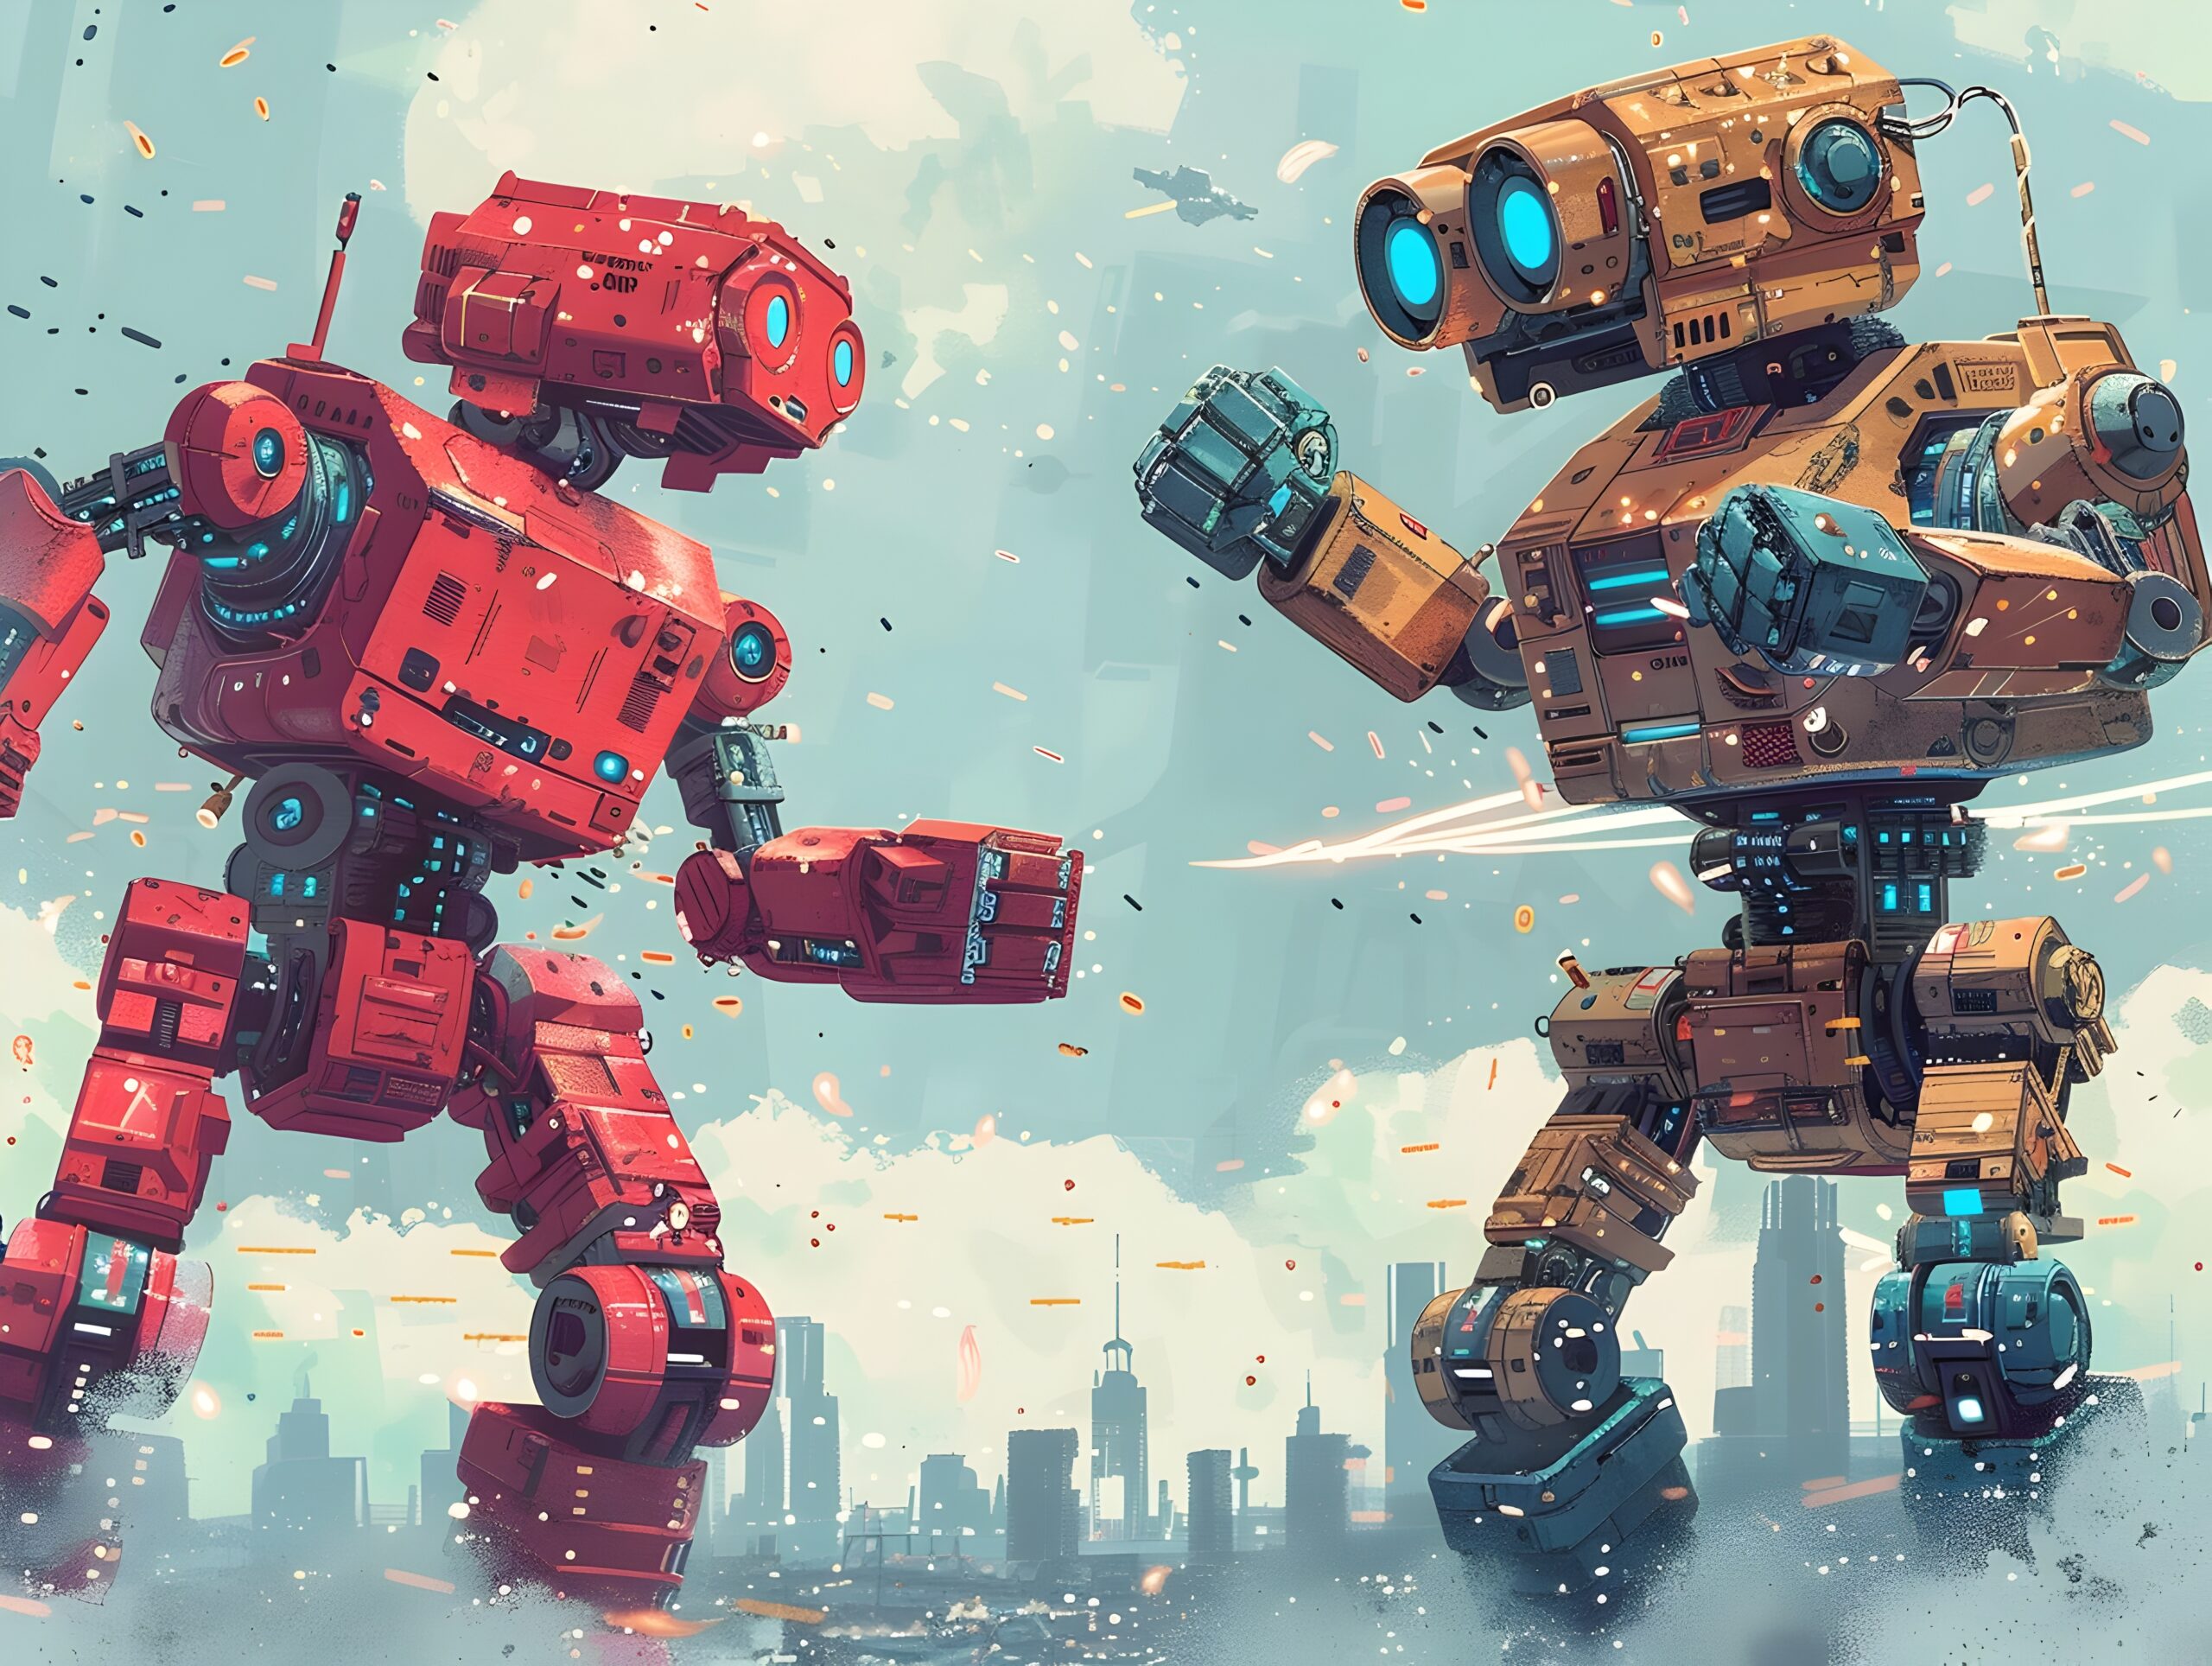 dynamic depicts a fierce robotic competition taking place against the backdrop of a futuristic cityscape